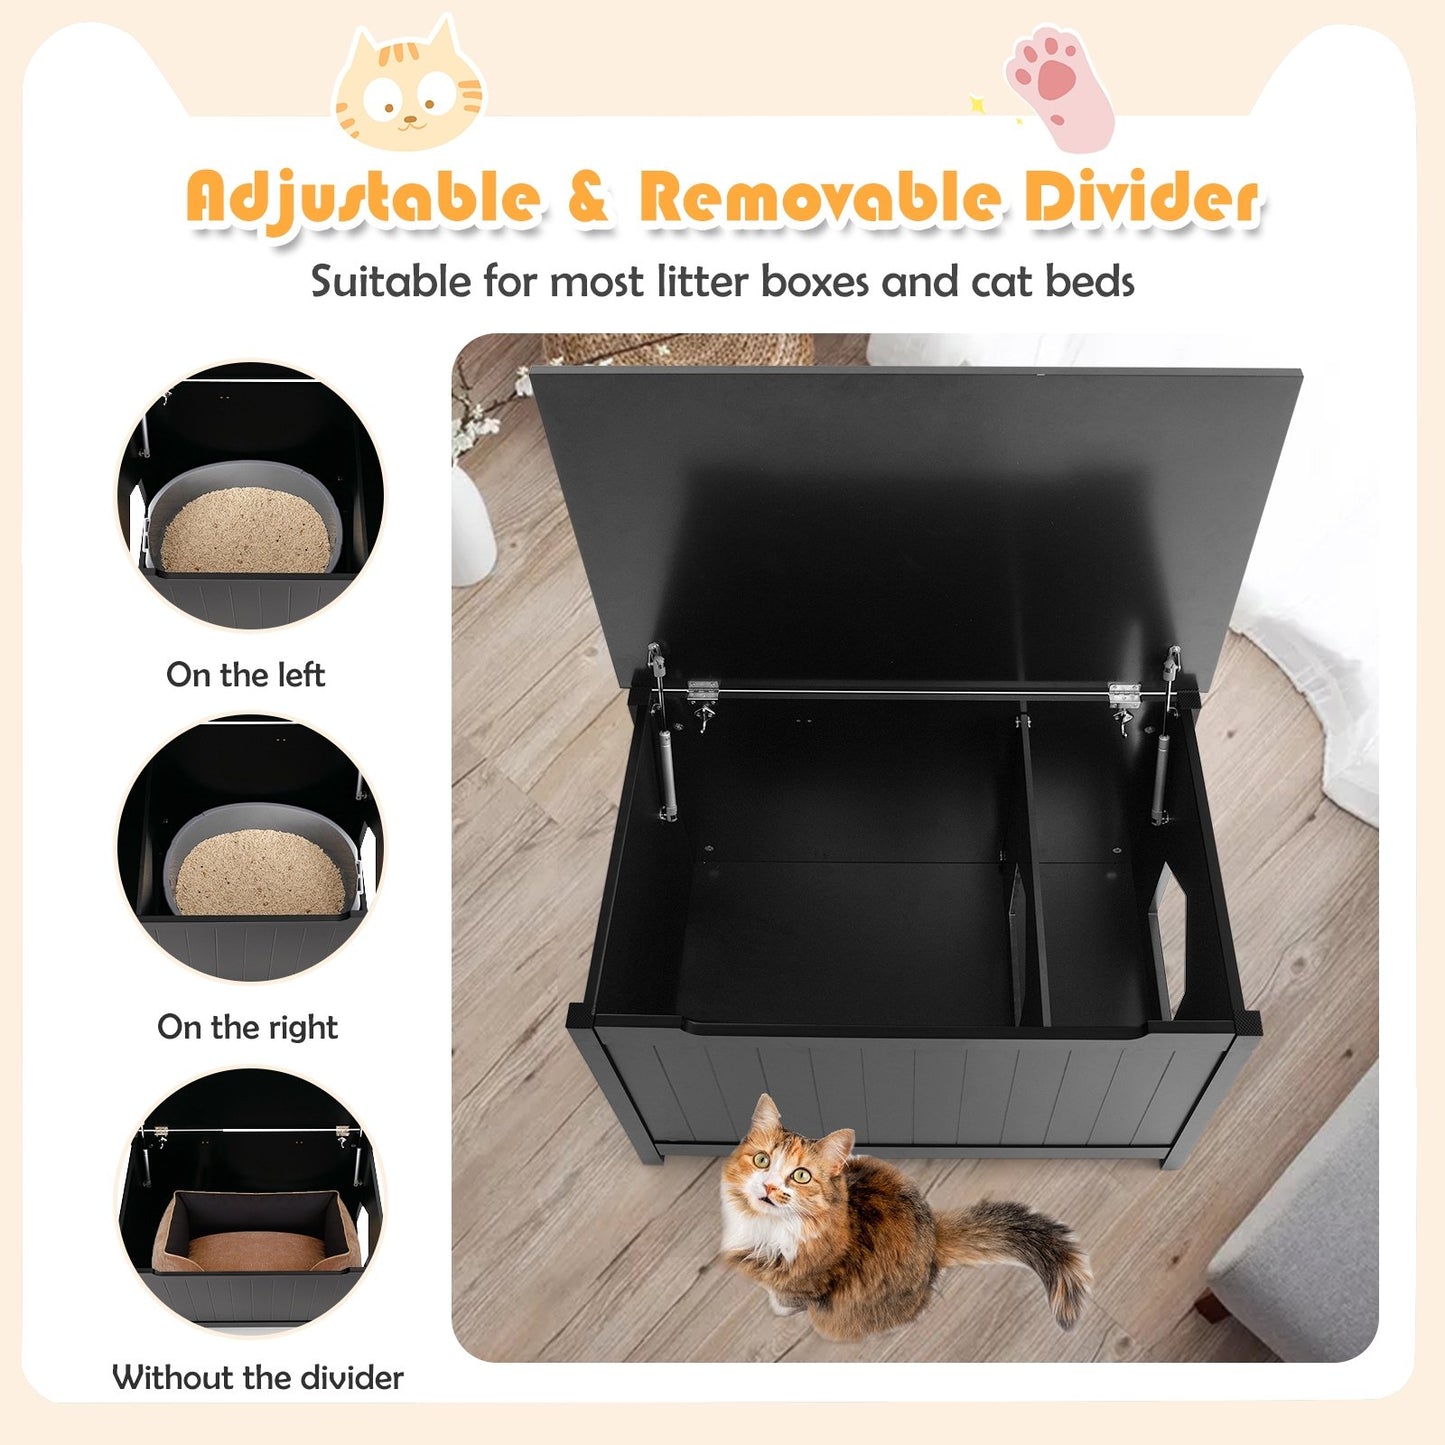 Wooden Cat Litter Box Enclosure with Top Opening Side Table, Black